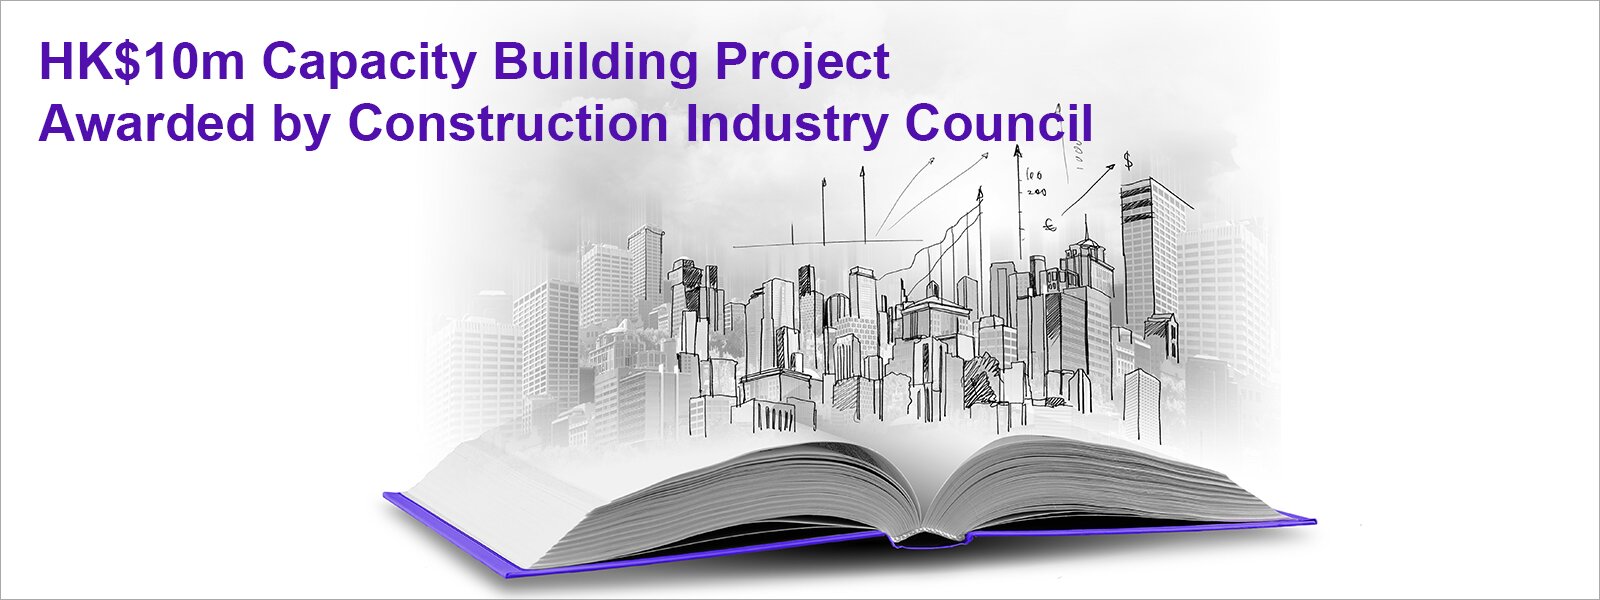 HK$10m Capacity Building Project Awarded by Construction Industry Council